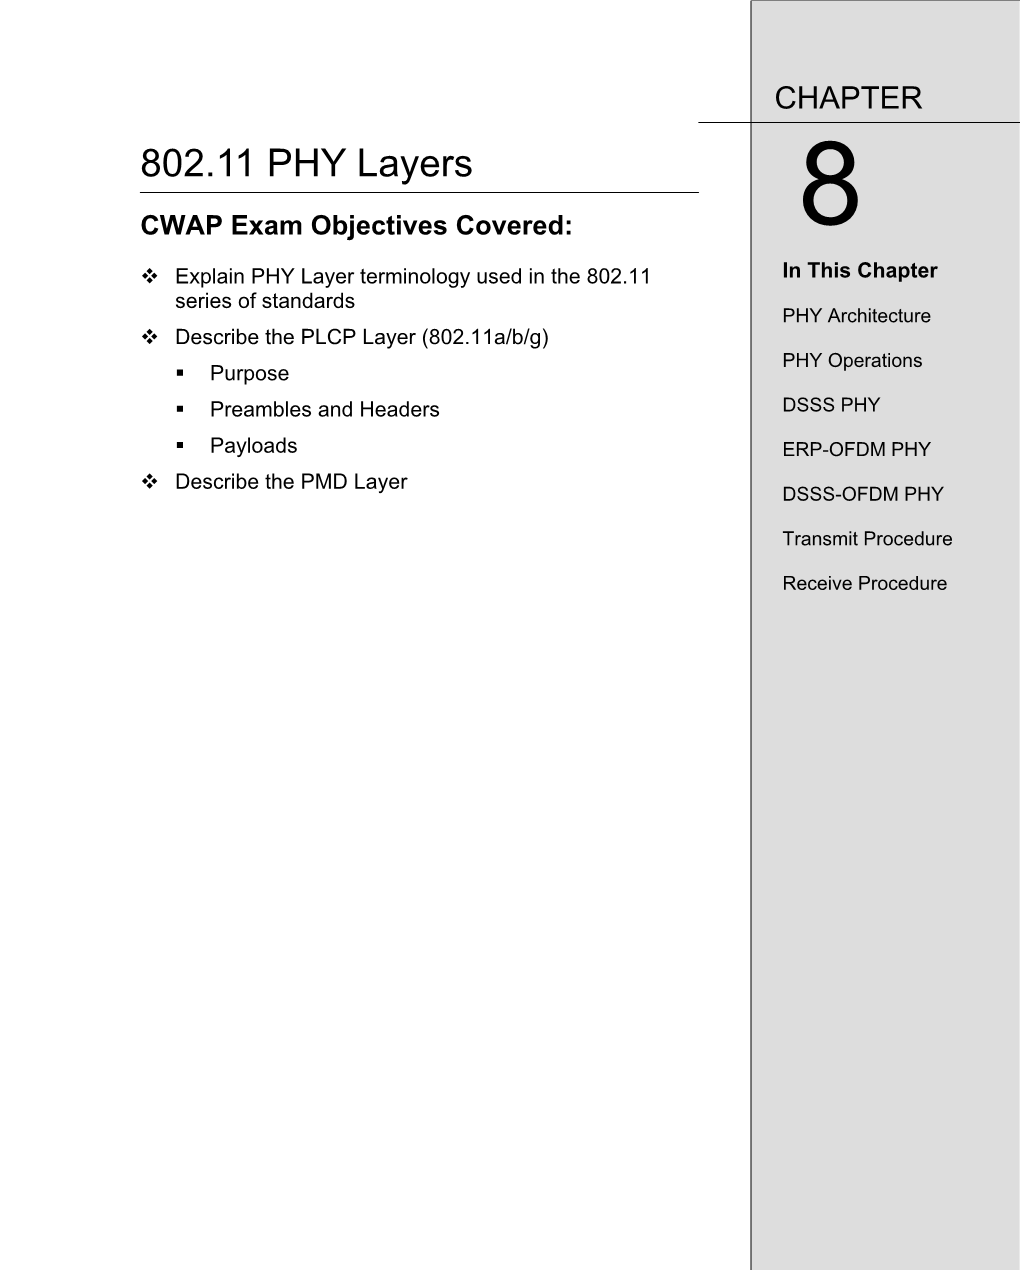 802.11 PHY Layers